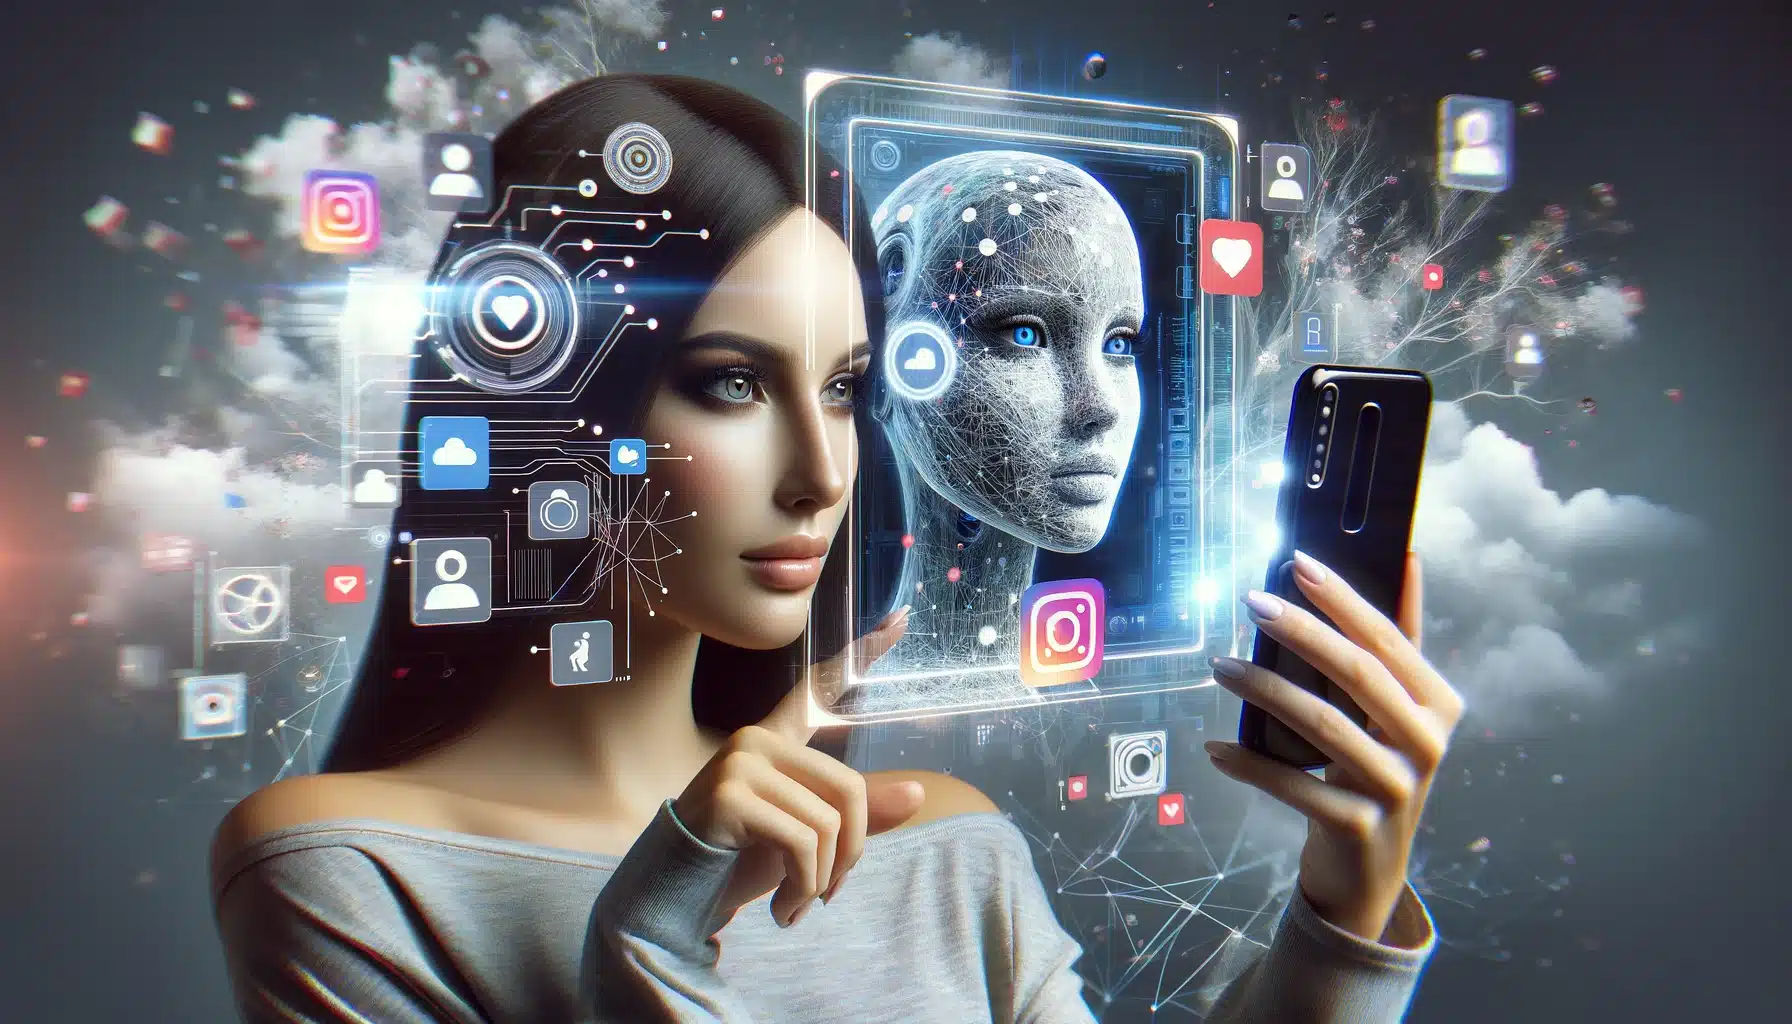 A photo-realistic composition depicting a female AI influencer showcased through an augmented reality Instagram-like interface. Interactive, floating digital icons surround her, blending real and virtual worlds. This image highlights the AI influencer's role in modern social media landscapes, illustrating the advanced integration of technology and digital persona creation.